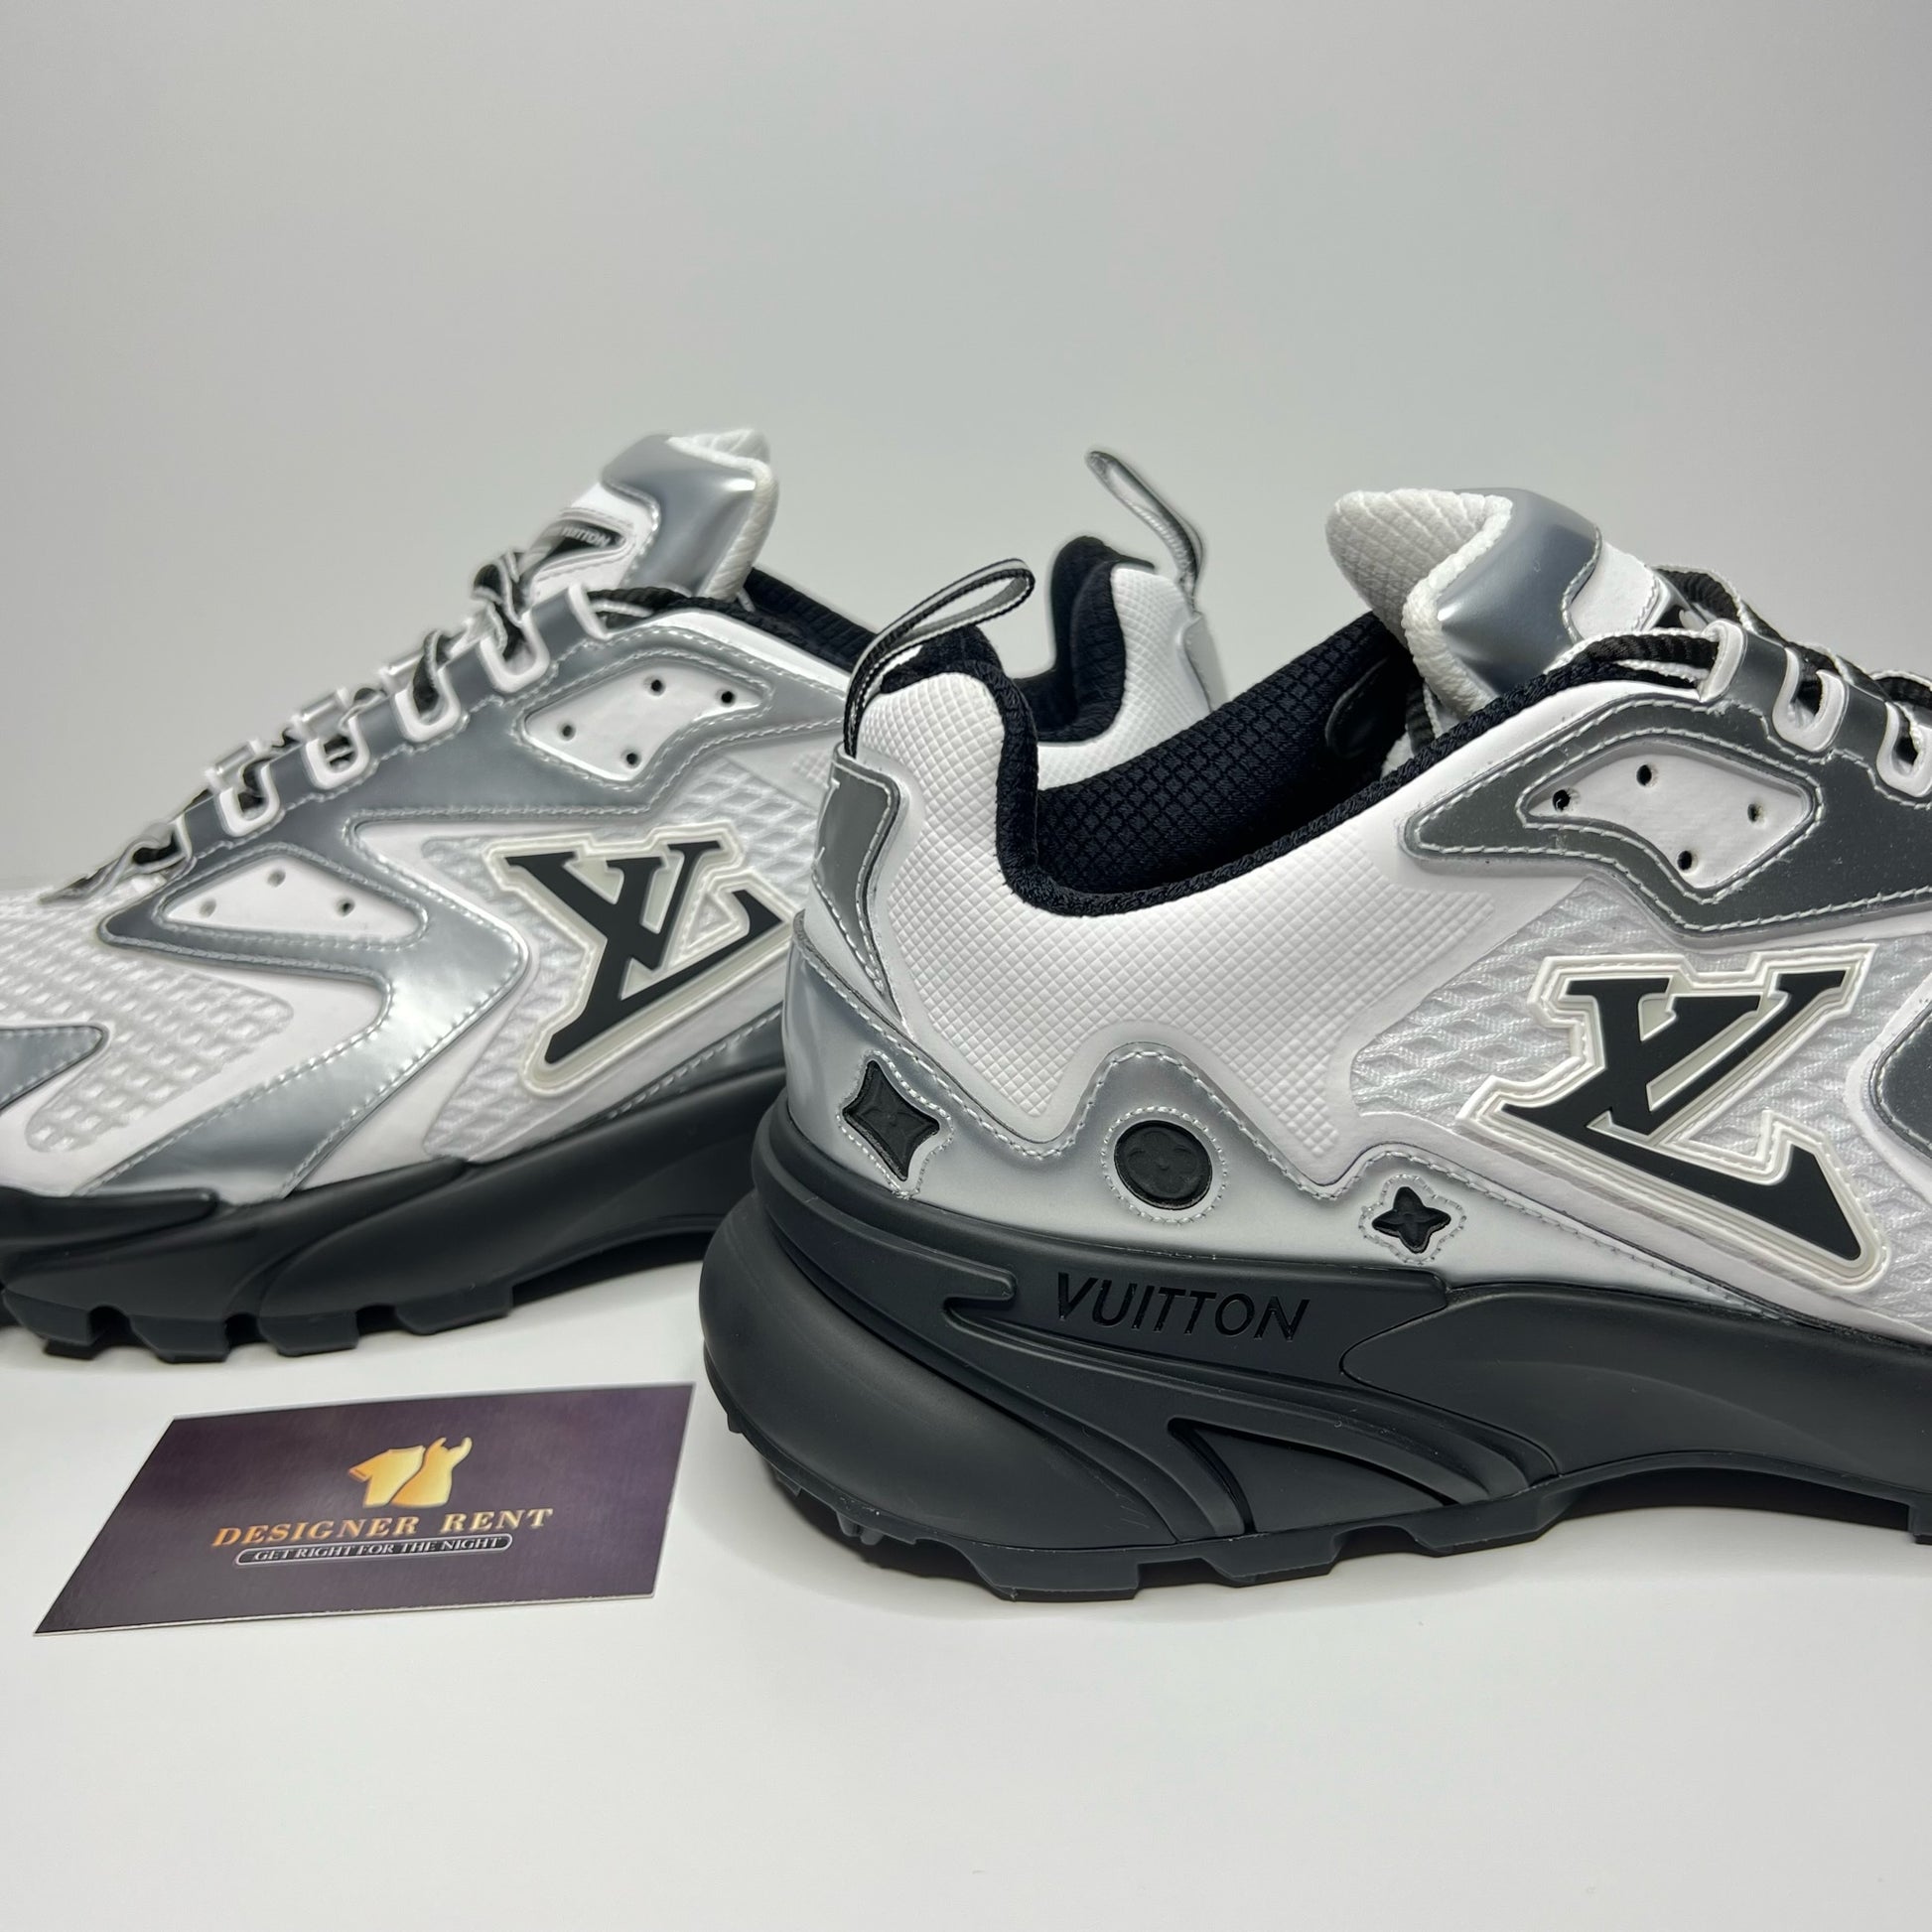 Louis Vuitton Launches New Runner Tatic Trainer